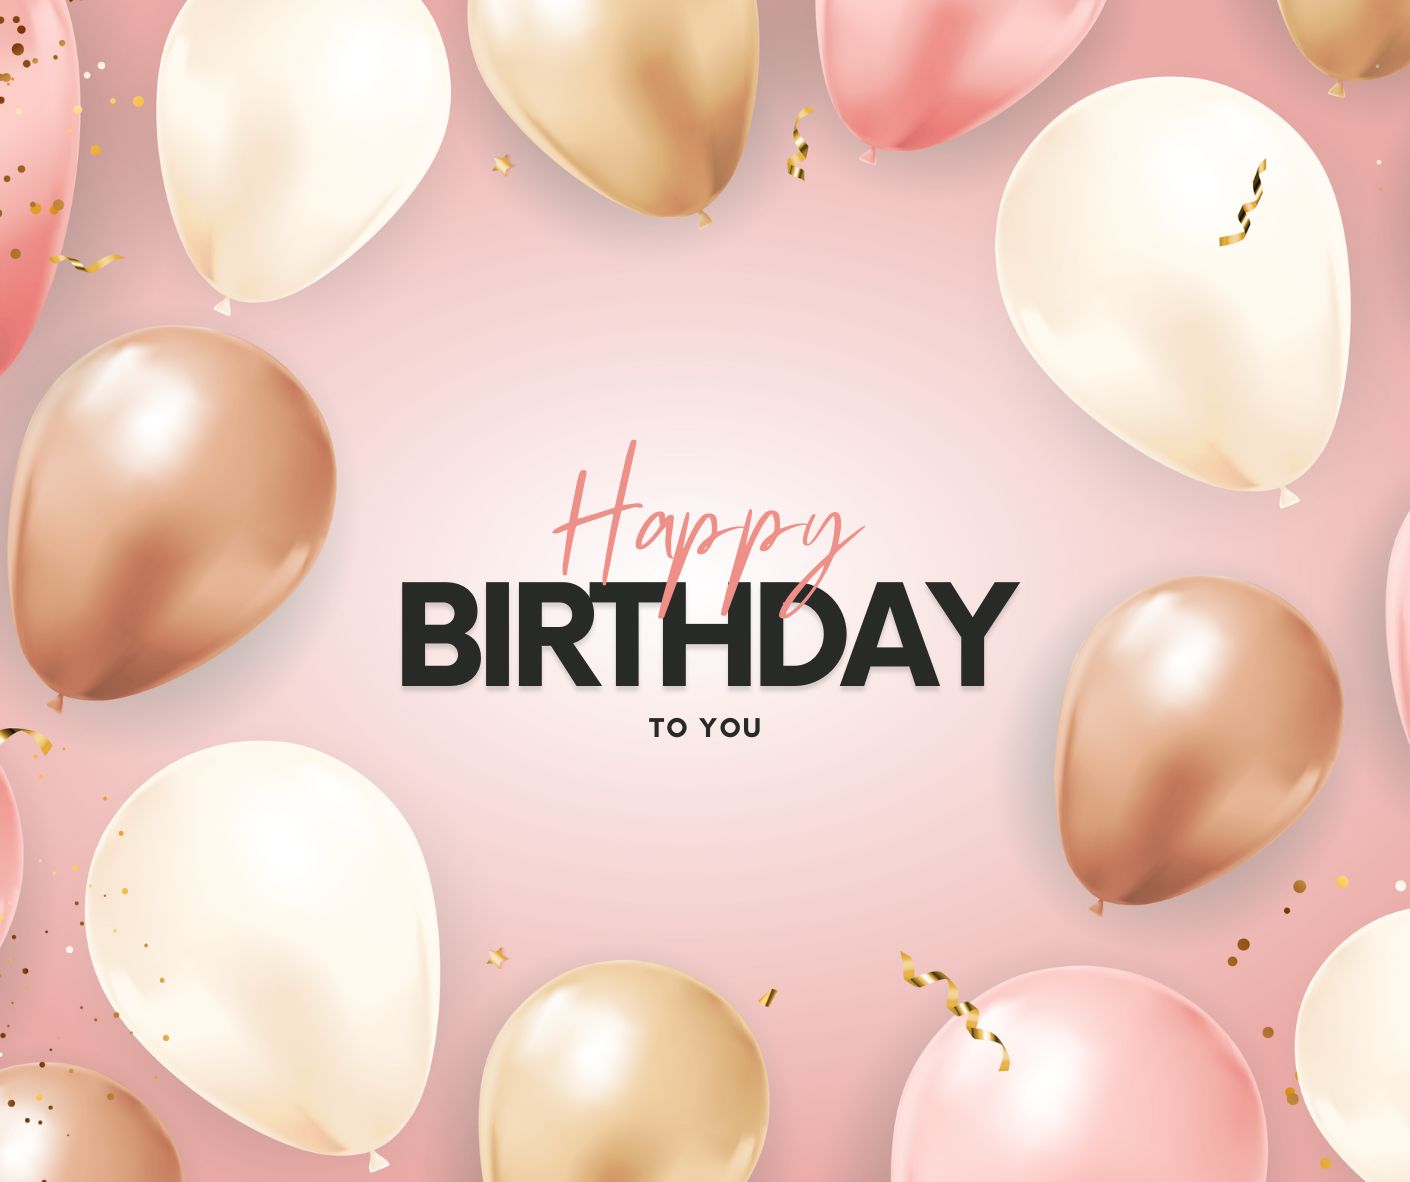 happy birthday images free download